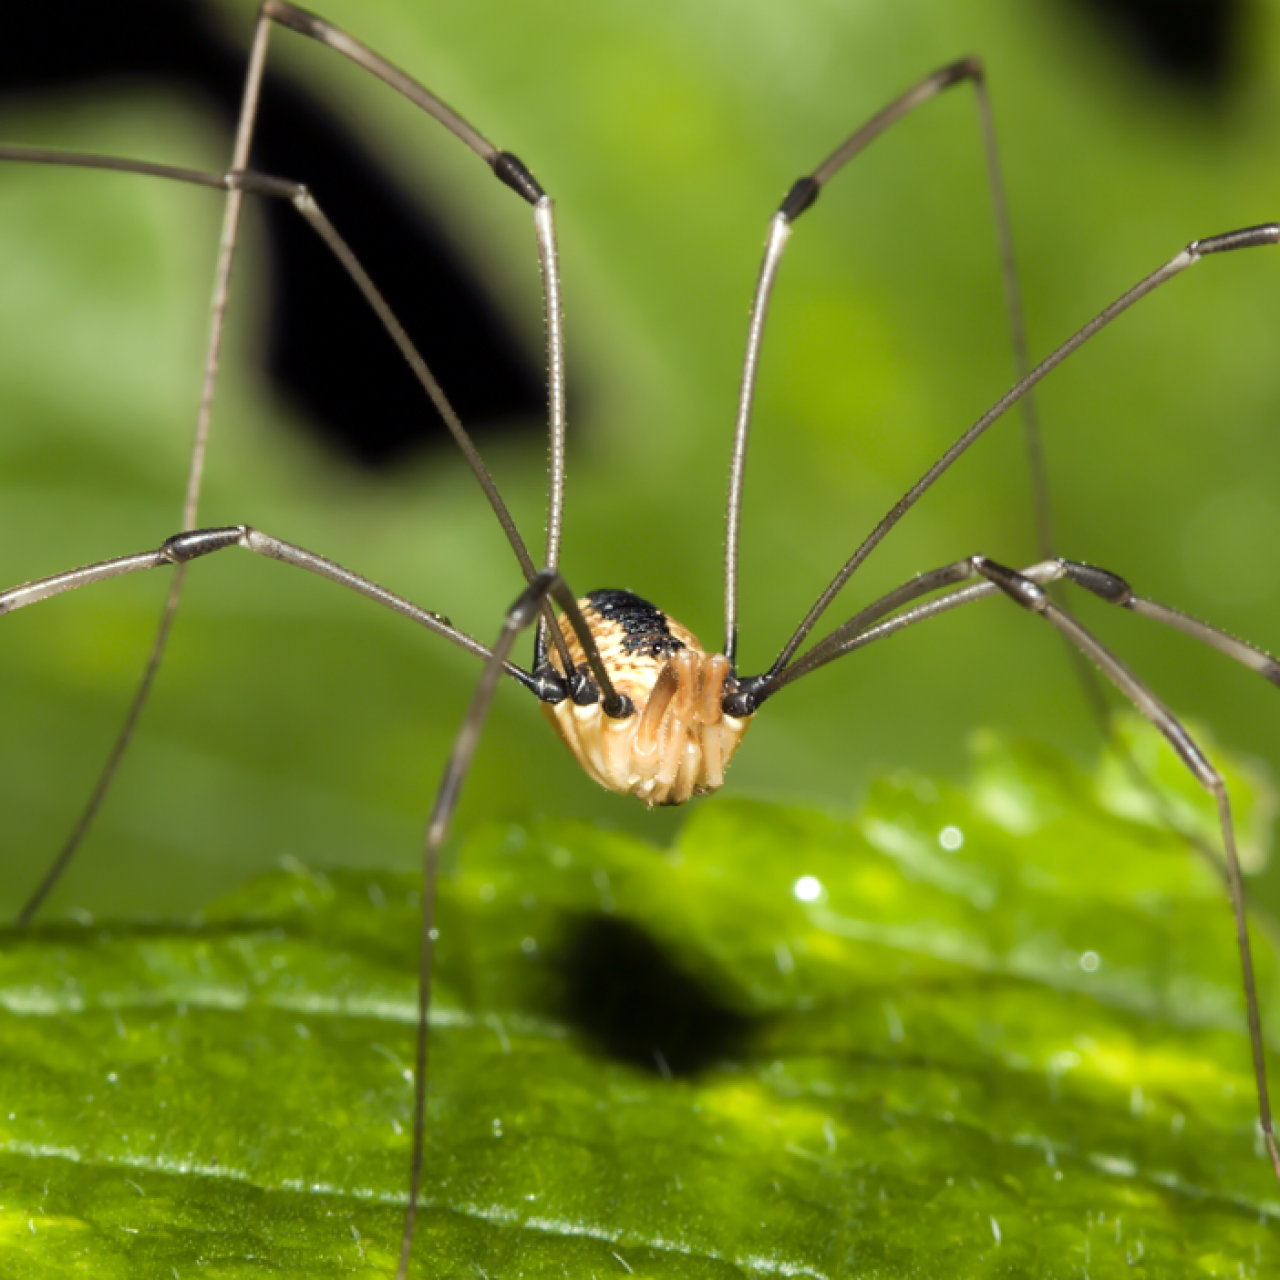 Did a 'New Deadly Spider' Species Kill Several People in the U.S. in the  Summer of 2018?